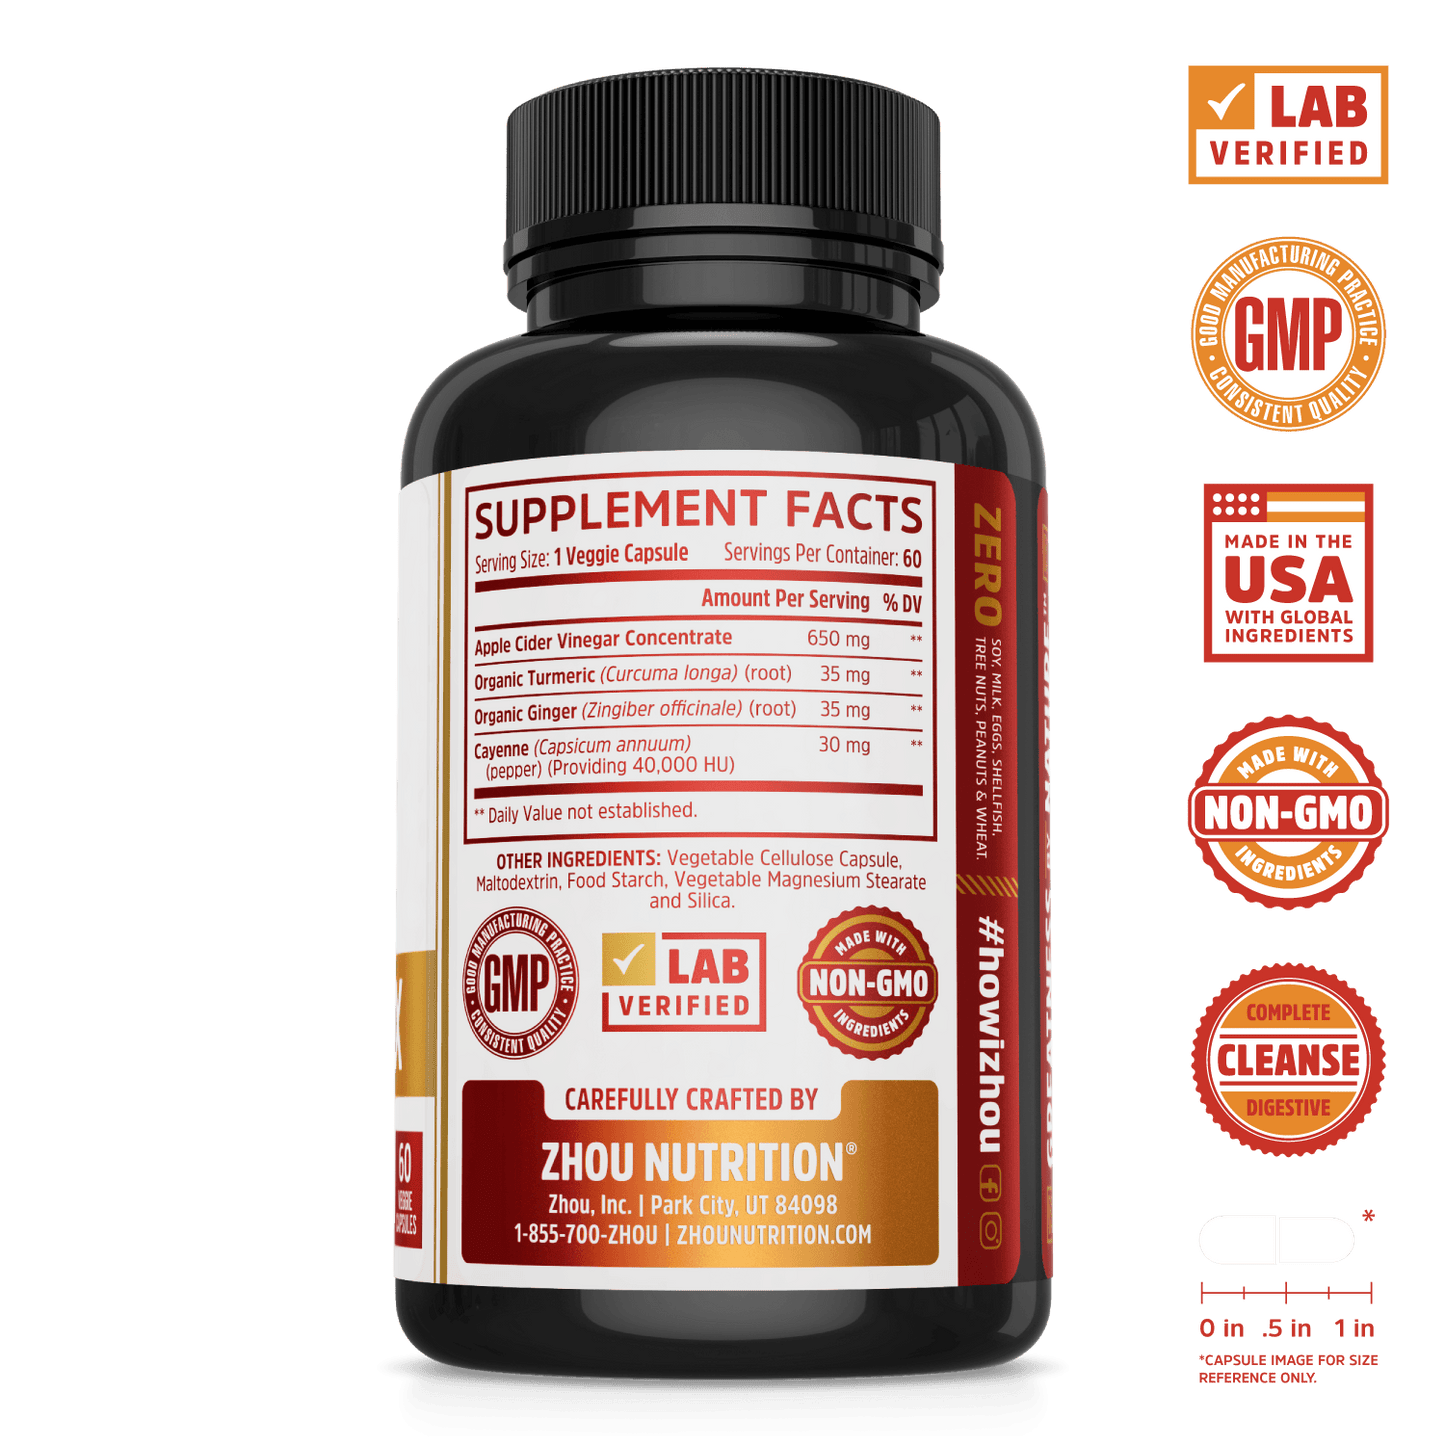 Cider Detox ACV Supplement from Zhou Nutrition. Lab verified, good manufacturing practices, made in the USA, made with non-GMO ingredients, complete digestive cleanse.